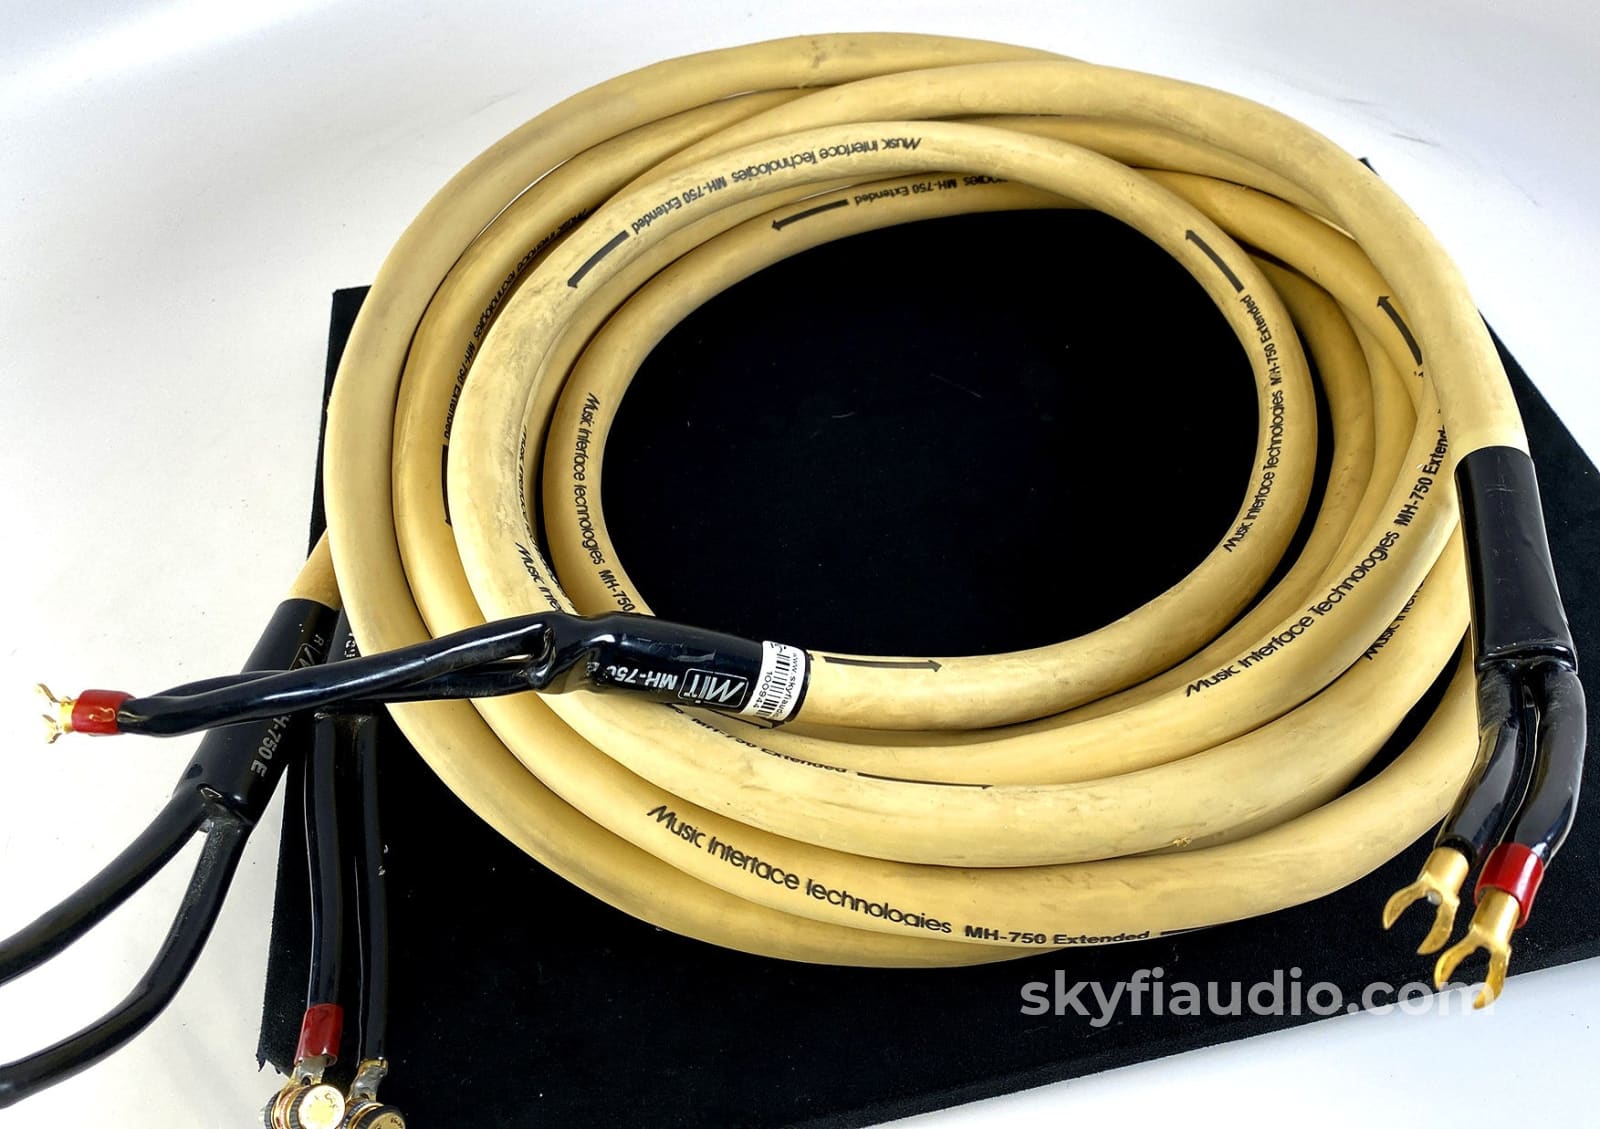 Mit (Music Interface Technologies) Mh-750 Speaker Cables - 15